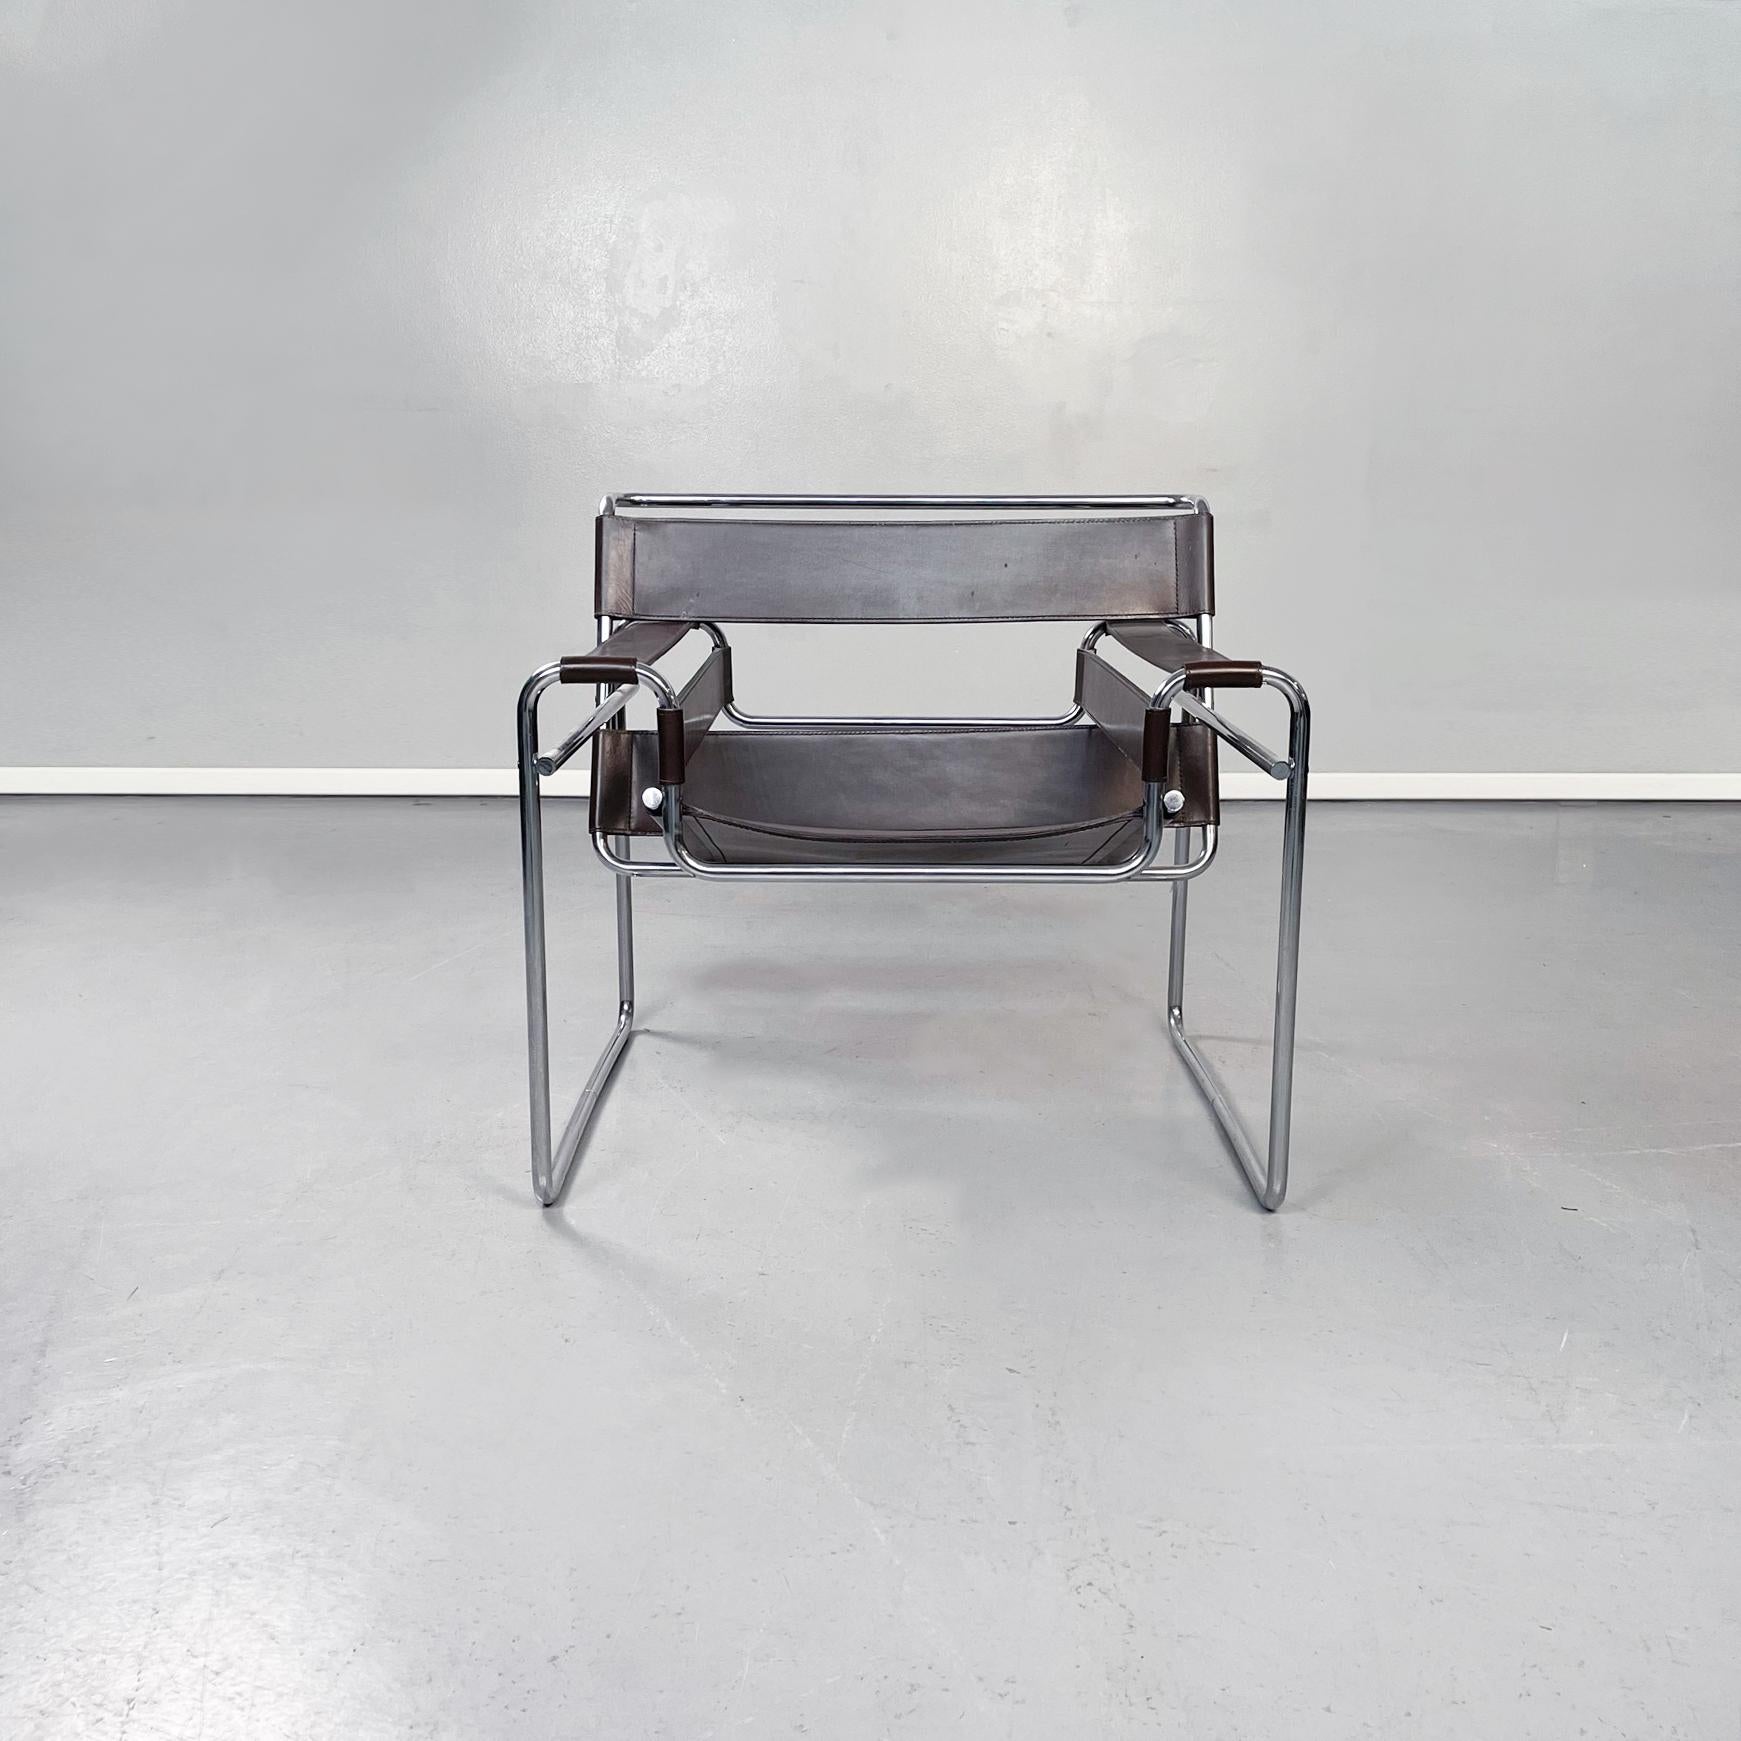 Italian mid-century Wassily B3 brown leather armchair by Breuer for Gavina, 1960s
Wassily Lounge Chair also known as Model B 3, with rectangular seat in dark brown leather and tubular structure in chromed steel.
Produced by Gavina in 1960s and